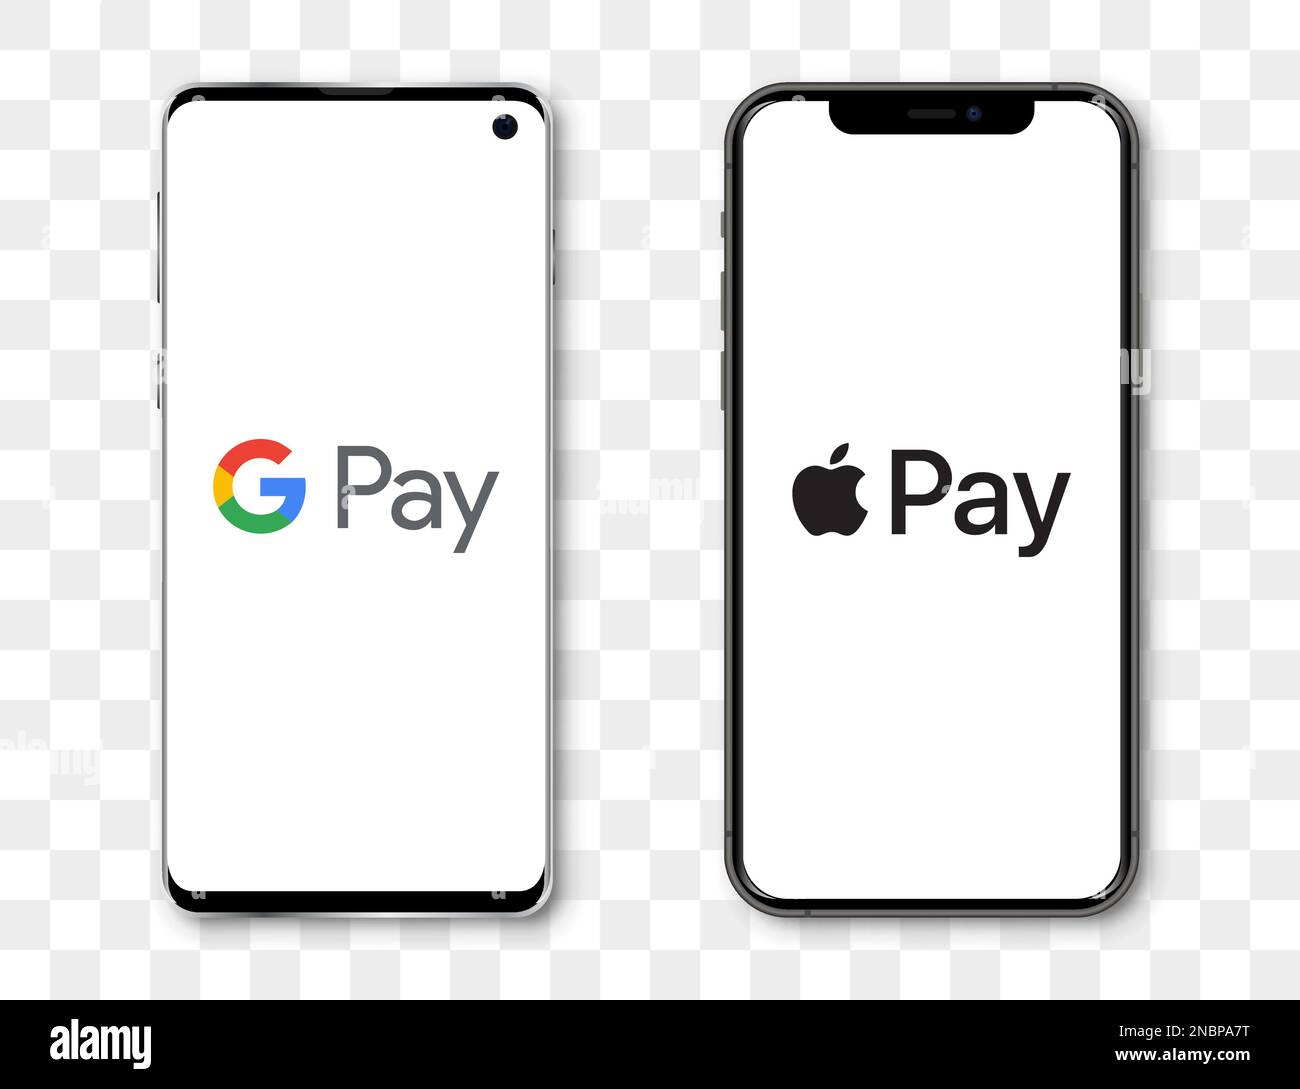 Apple Pay Iphone Stock Vector Images - Alamy